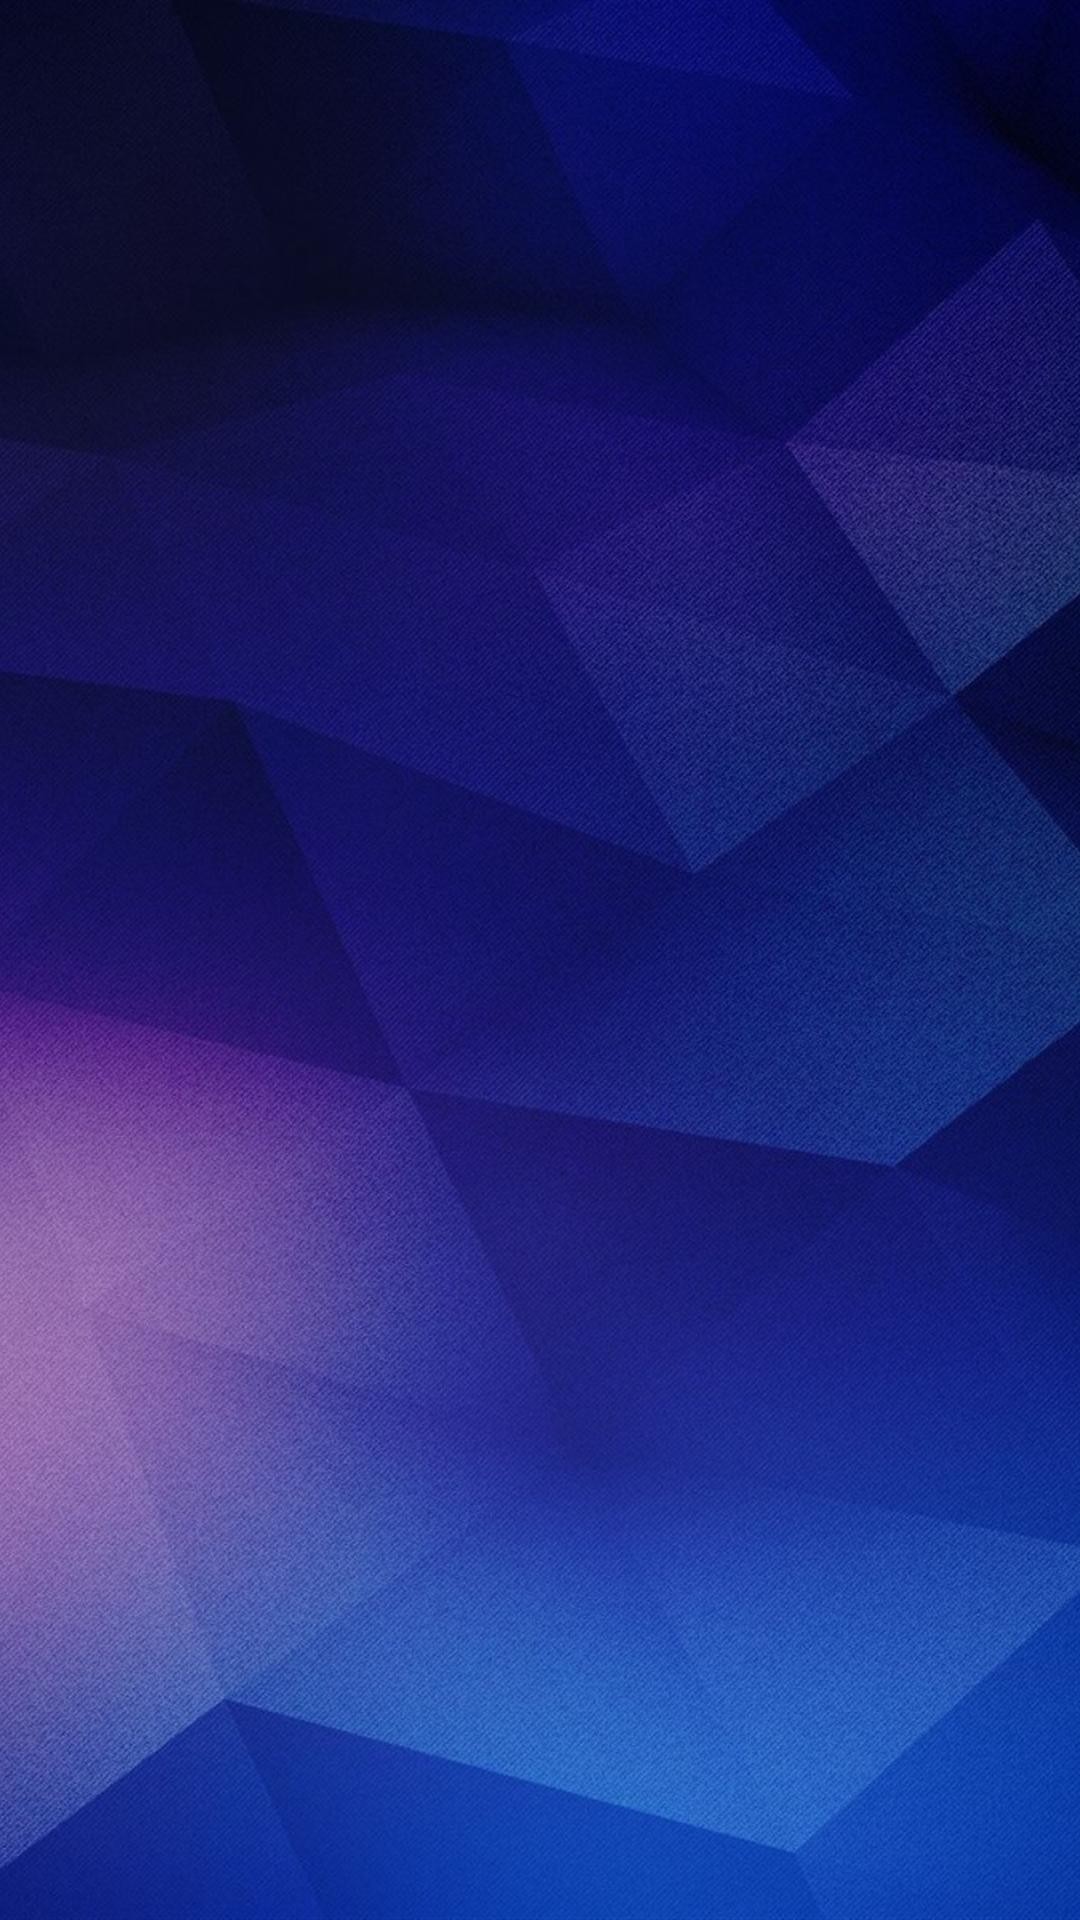 1080x1920 plus hd texture triangles abstraction iphone 6 plus wallpapers